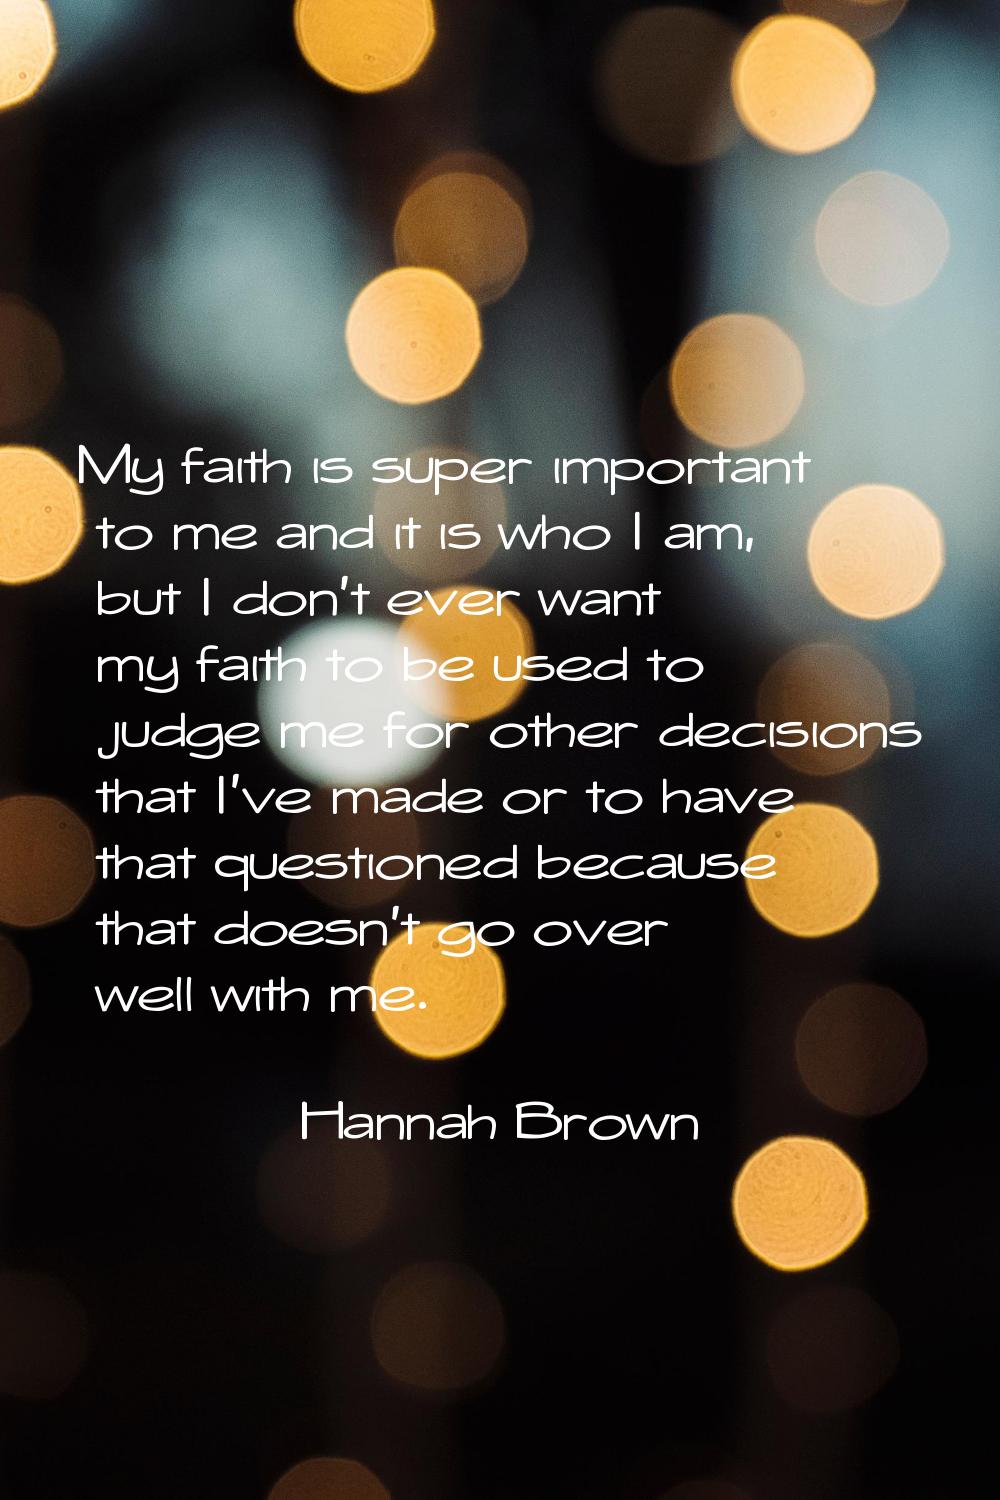 My faith is super important to me and it is who I am, but I don't ever want my faith to be used to 